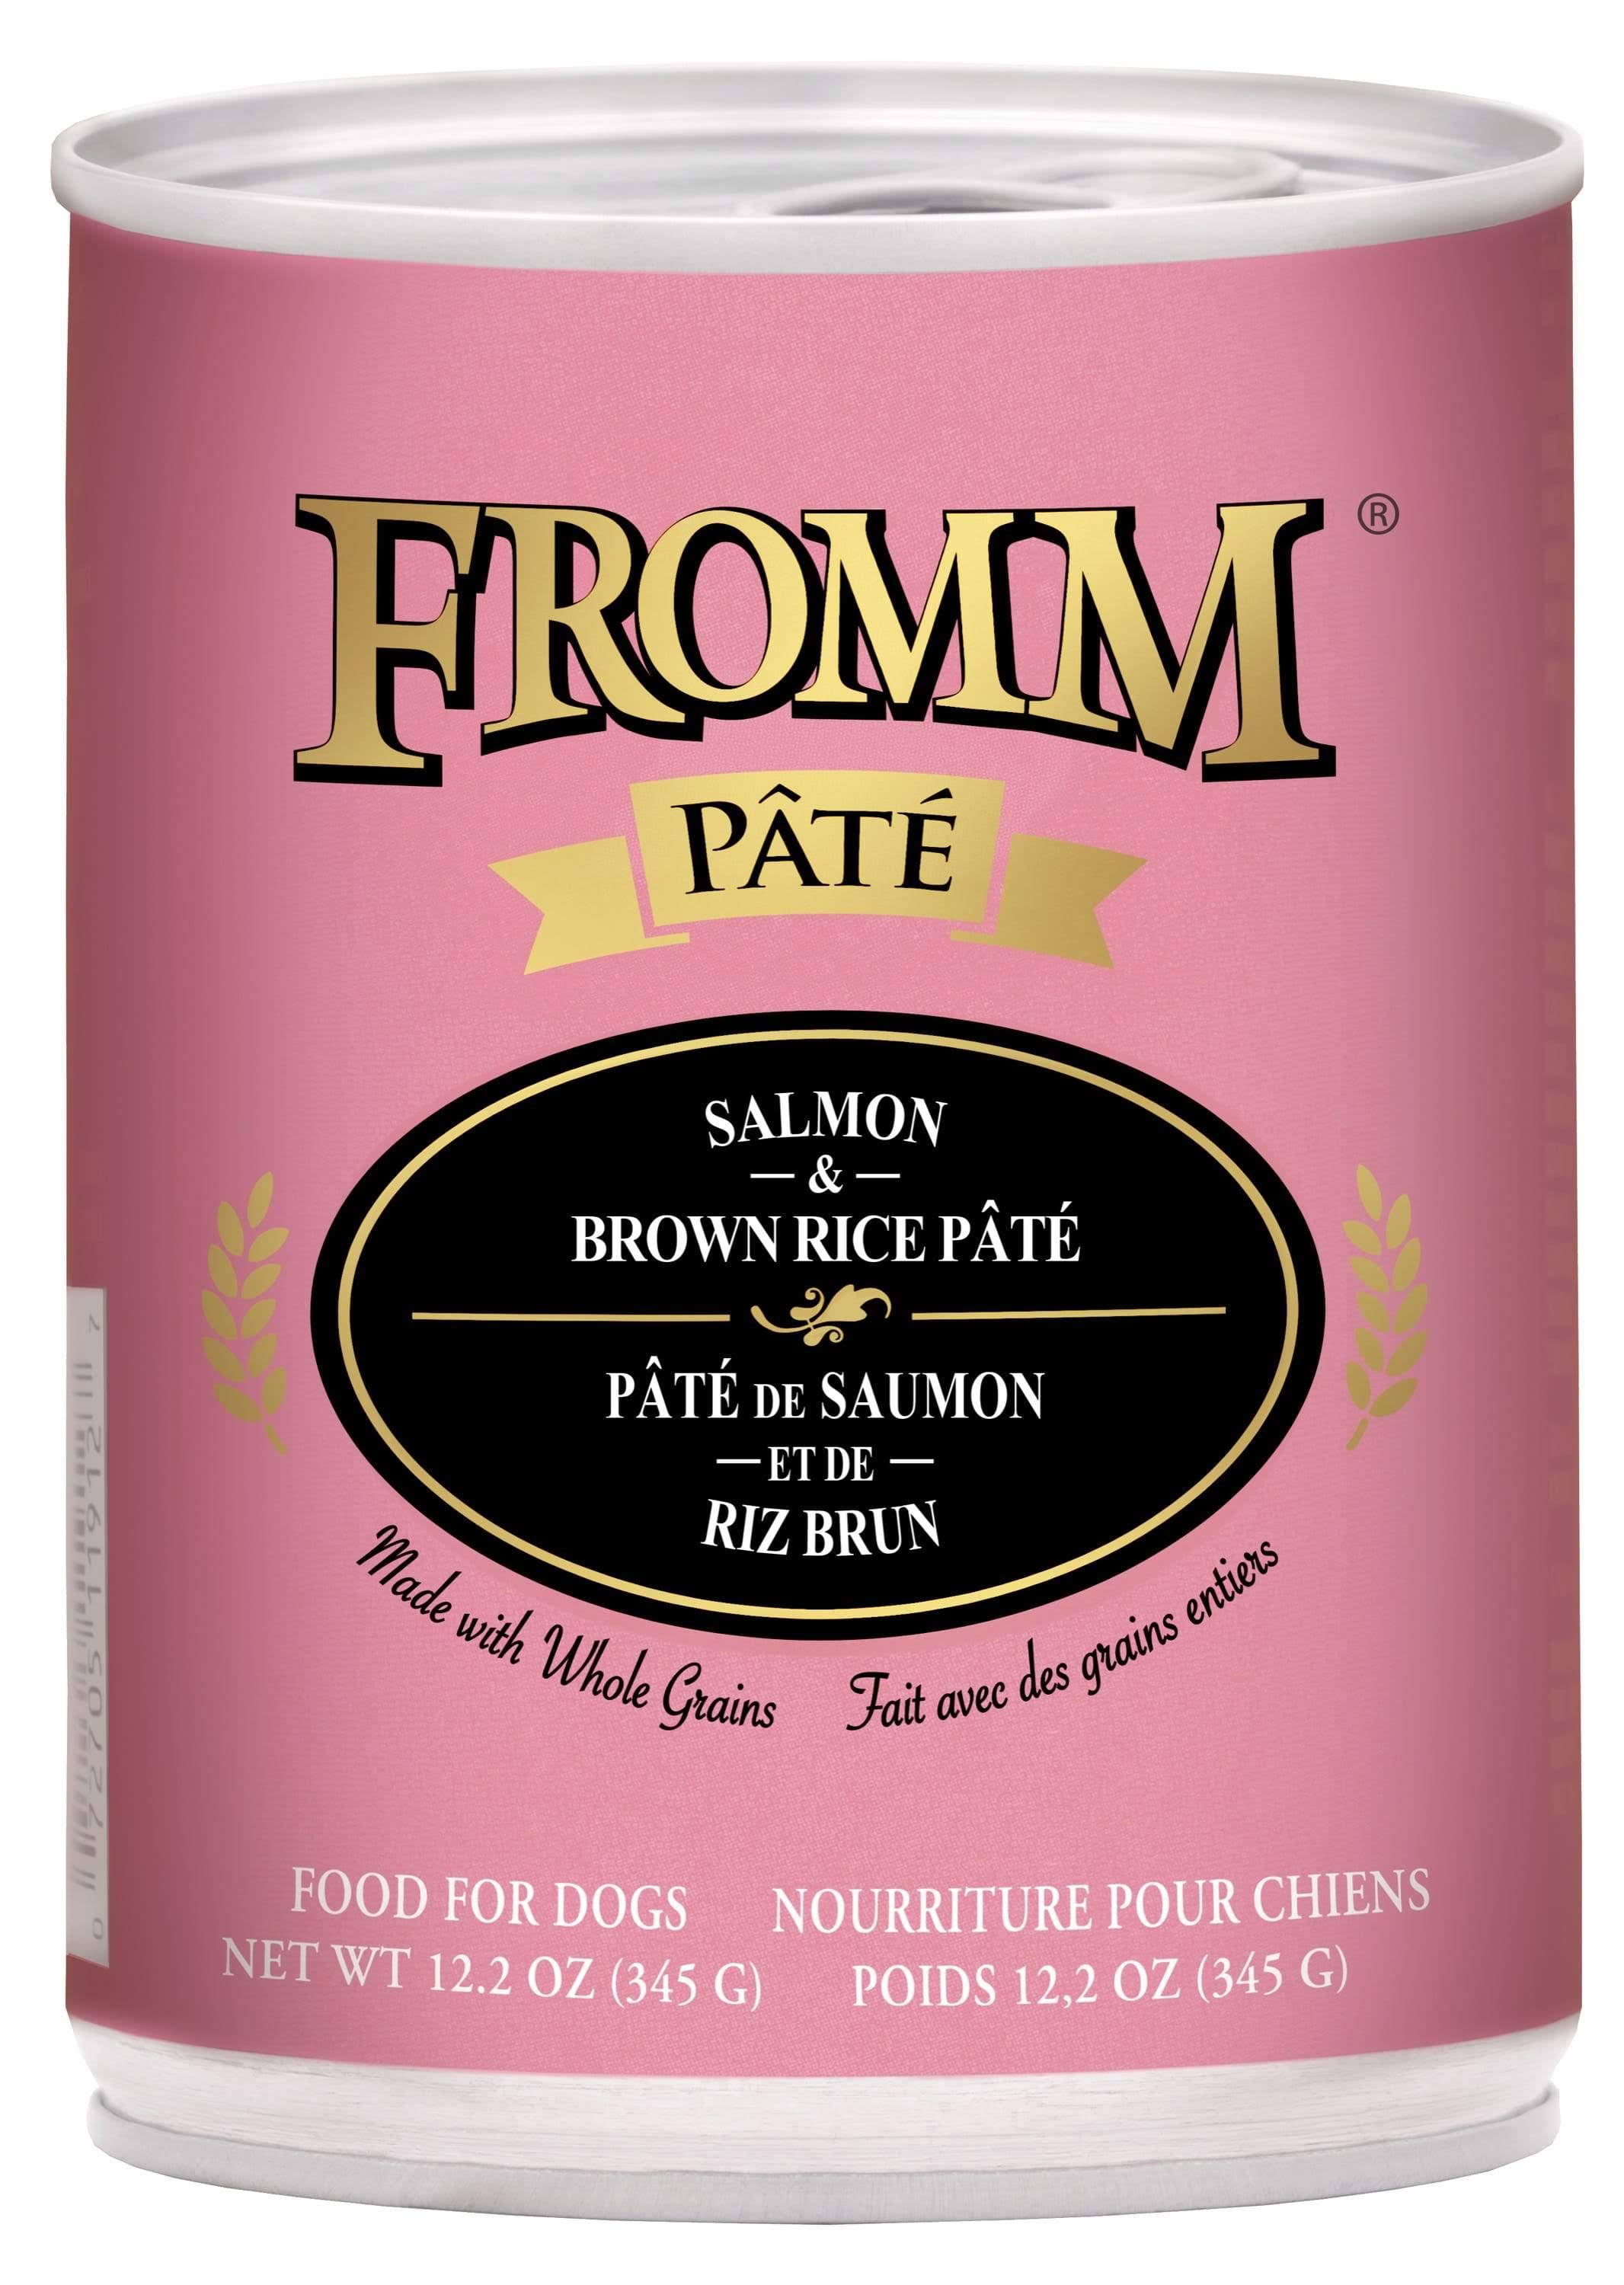 Fromm Dog Salmon & Brown Rice Pate